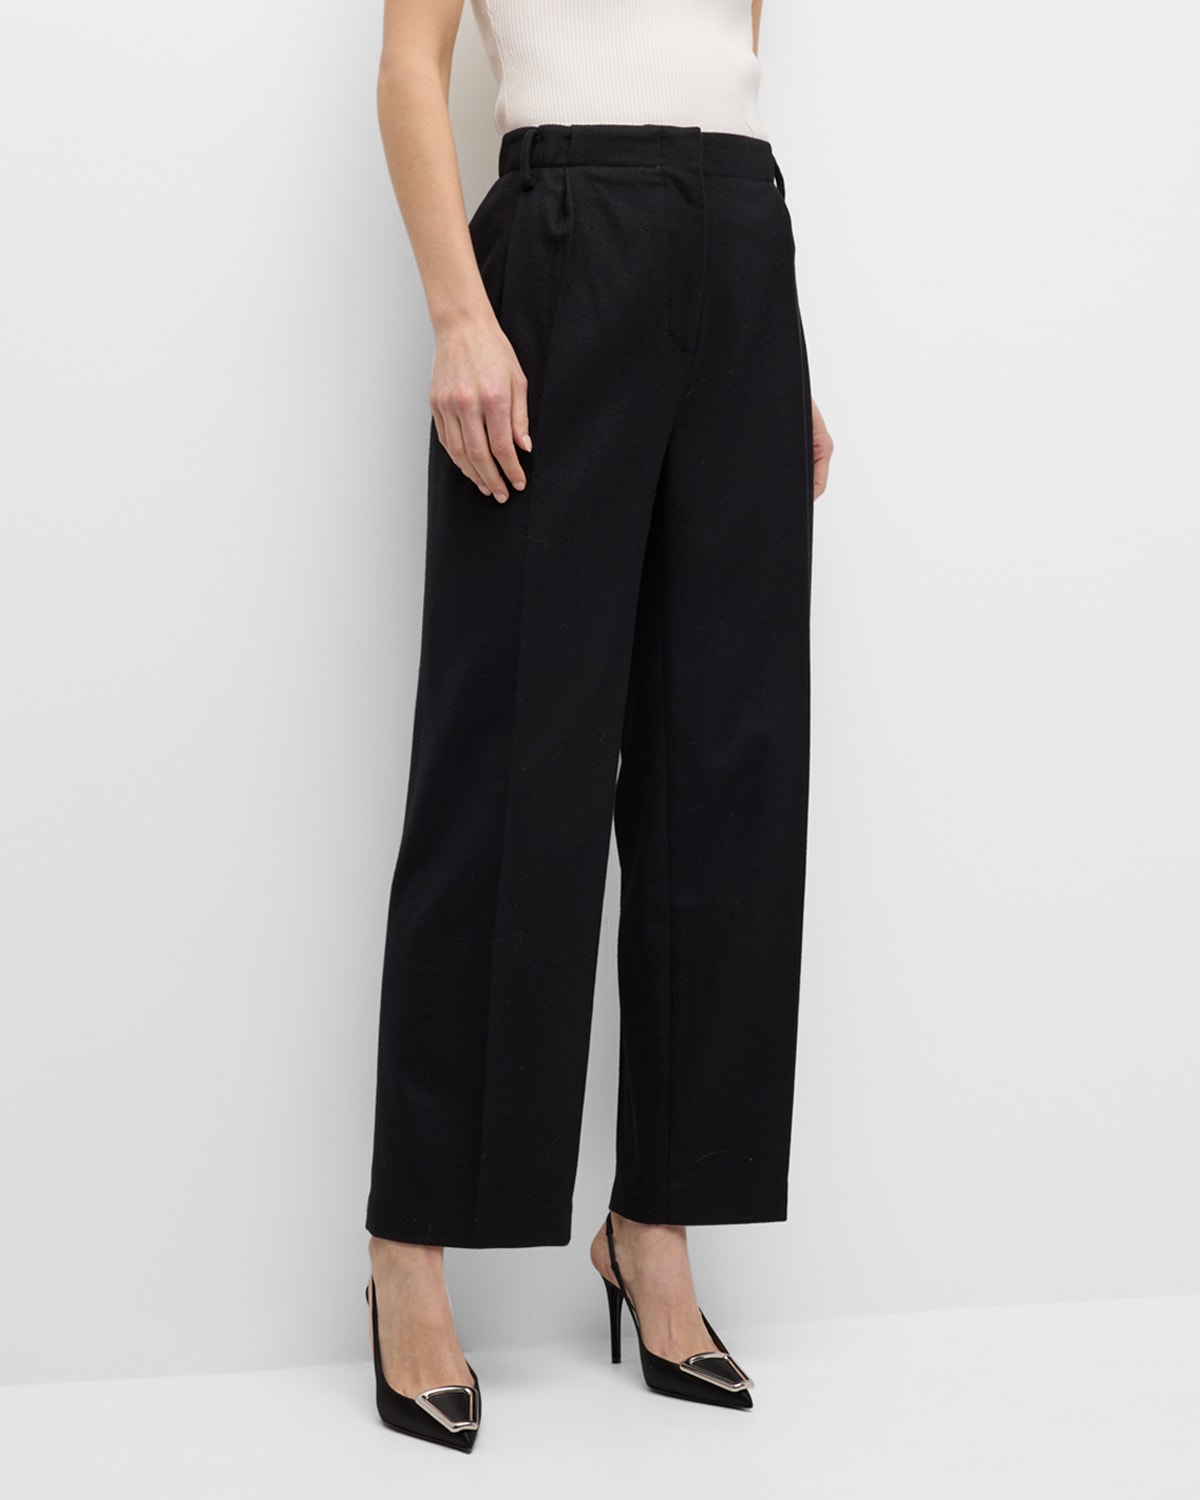 The Ren Pleated Trousers